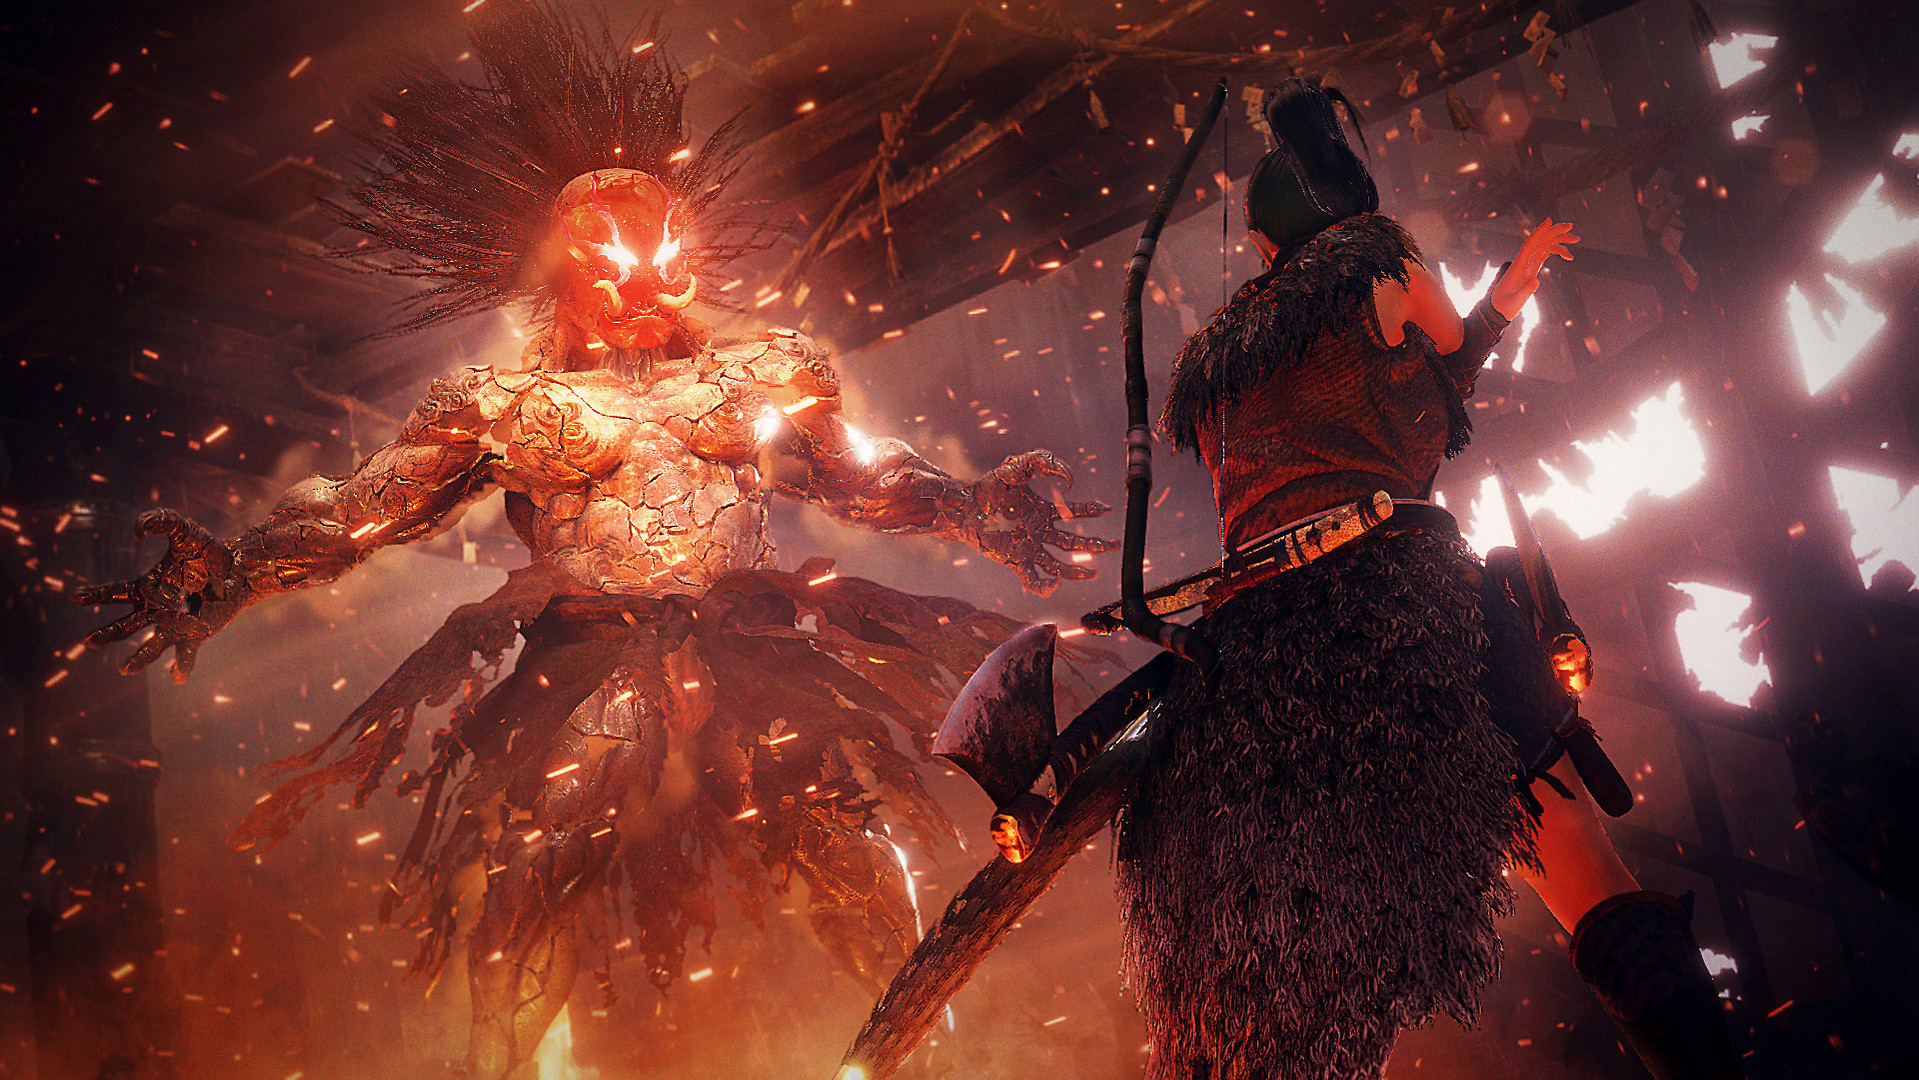 Nioh 2 Launches in Early 2020, New TGS 2019 Trailer